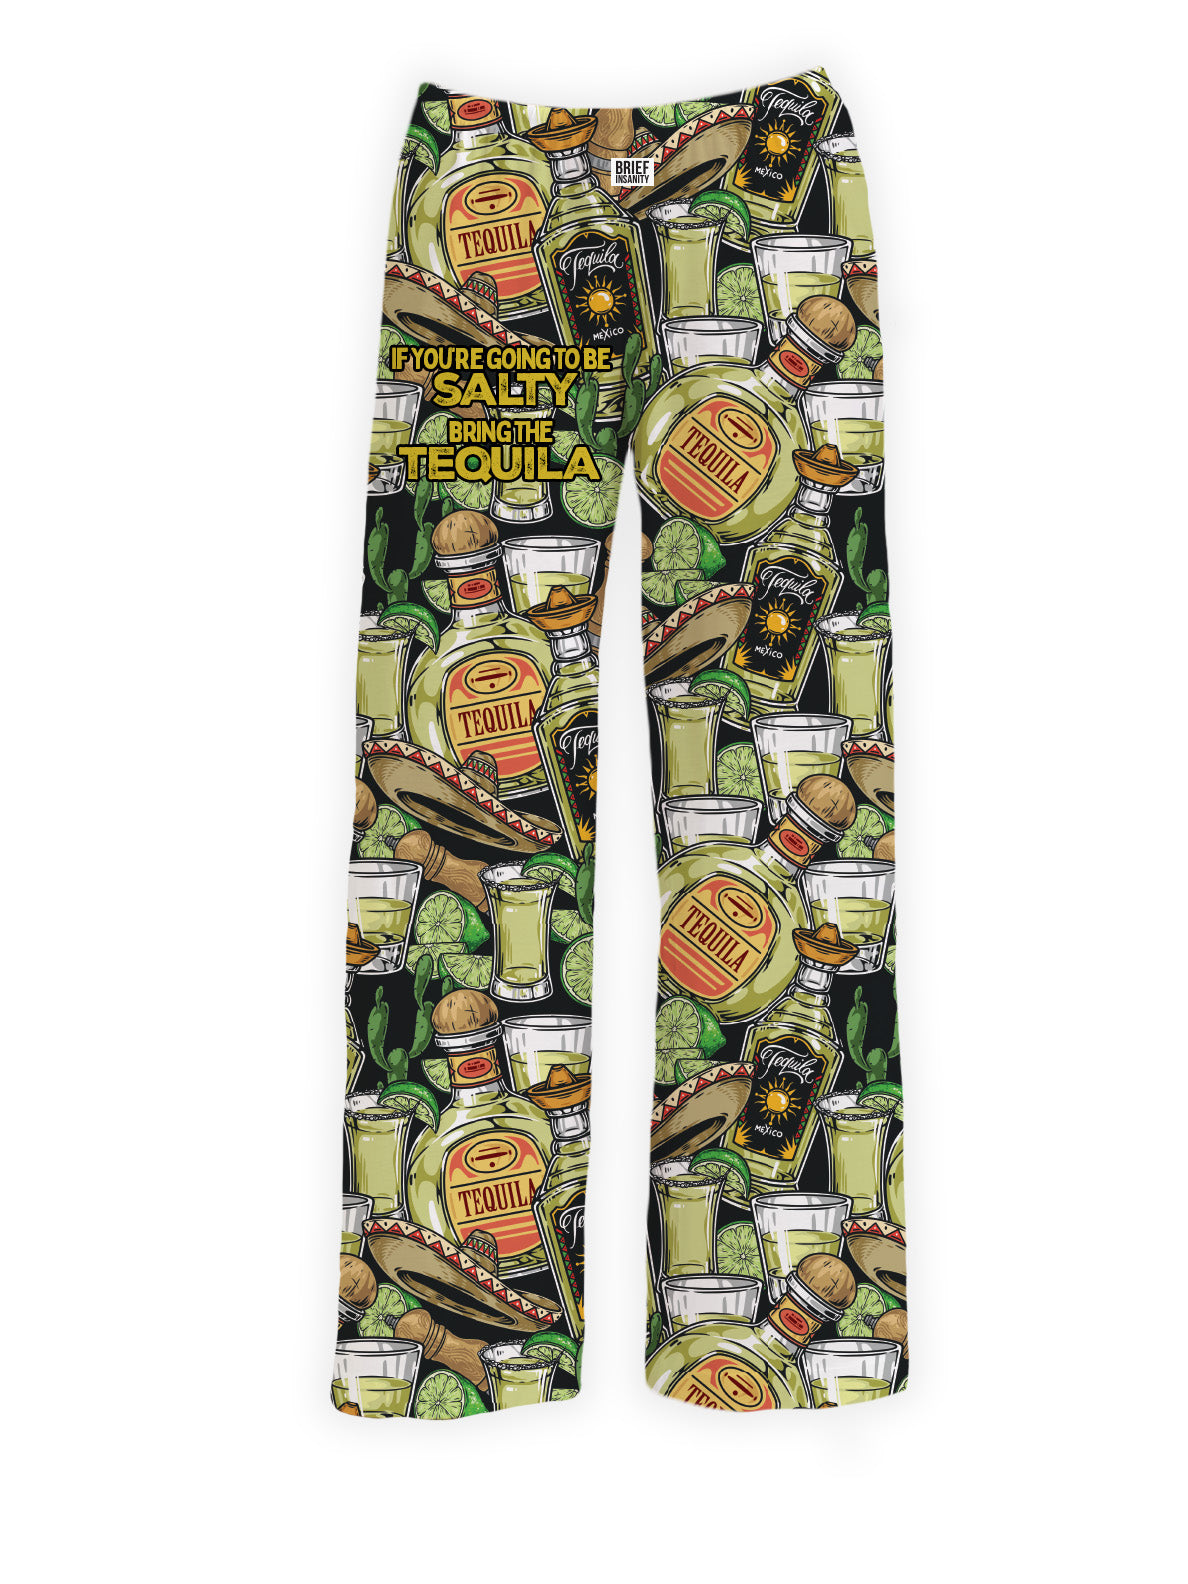 BRIEF INSANITY's Corks Are For Quitters Pajama Lounge Pants